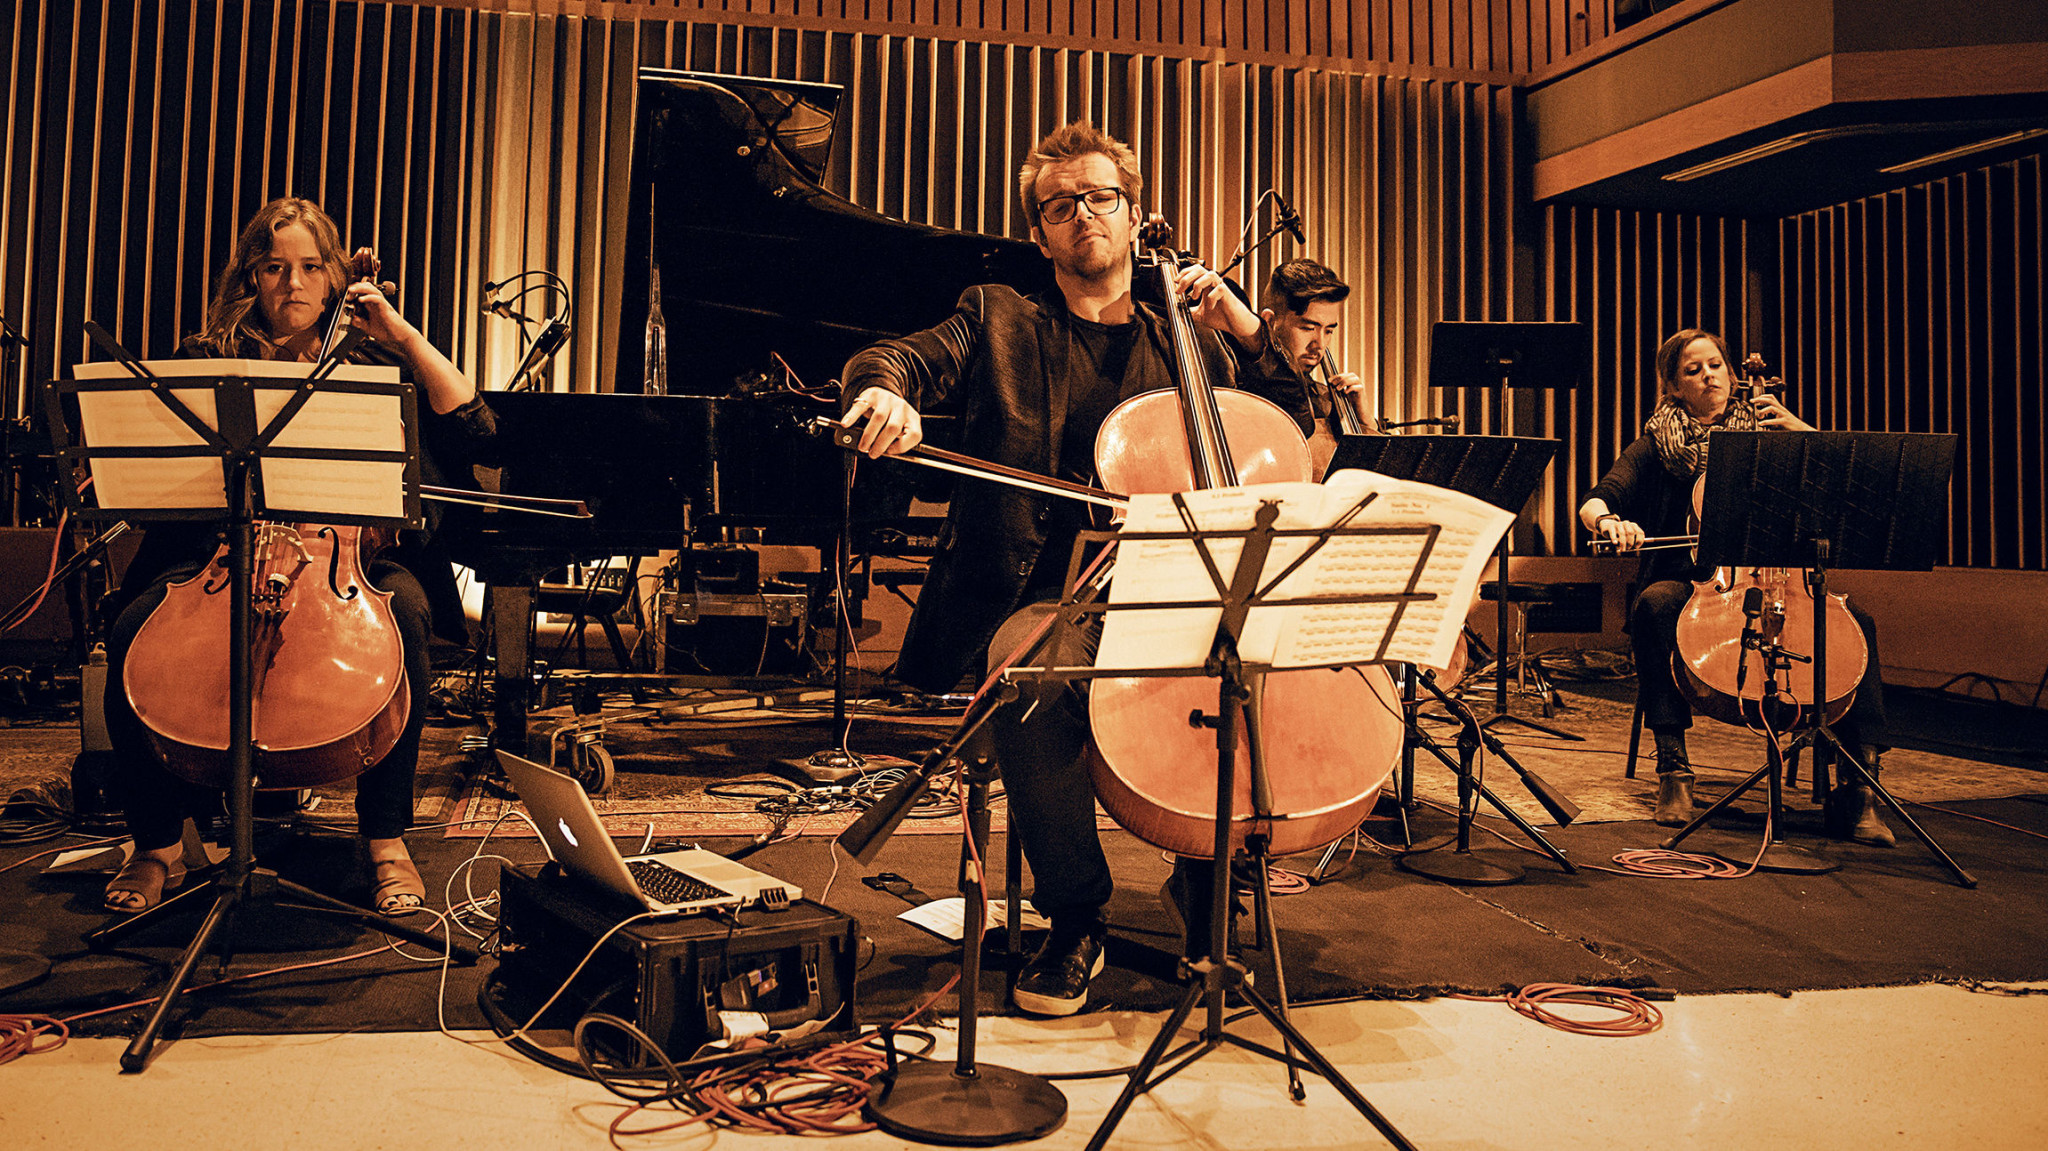 Peter Gregson veröffentlicht "An Evening at Capitol Studios: Bach Recomposed"